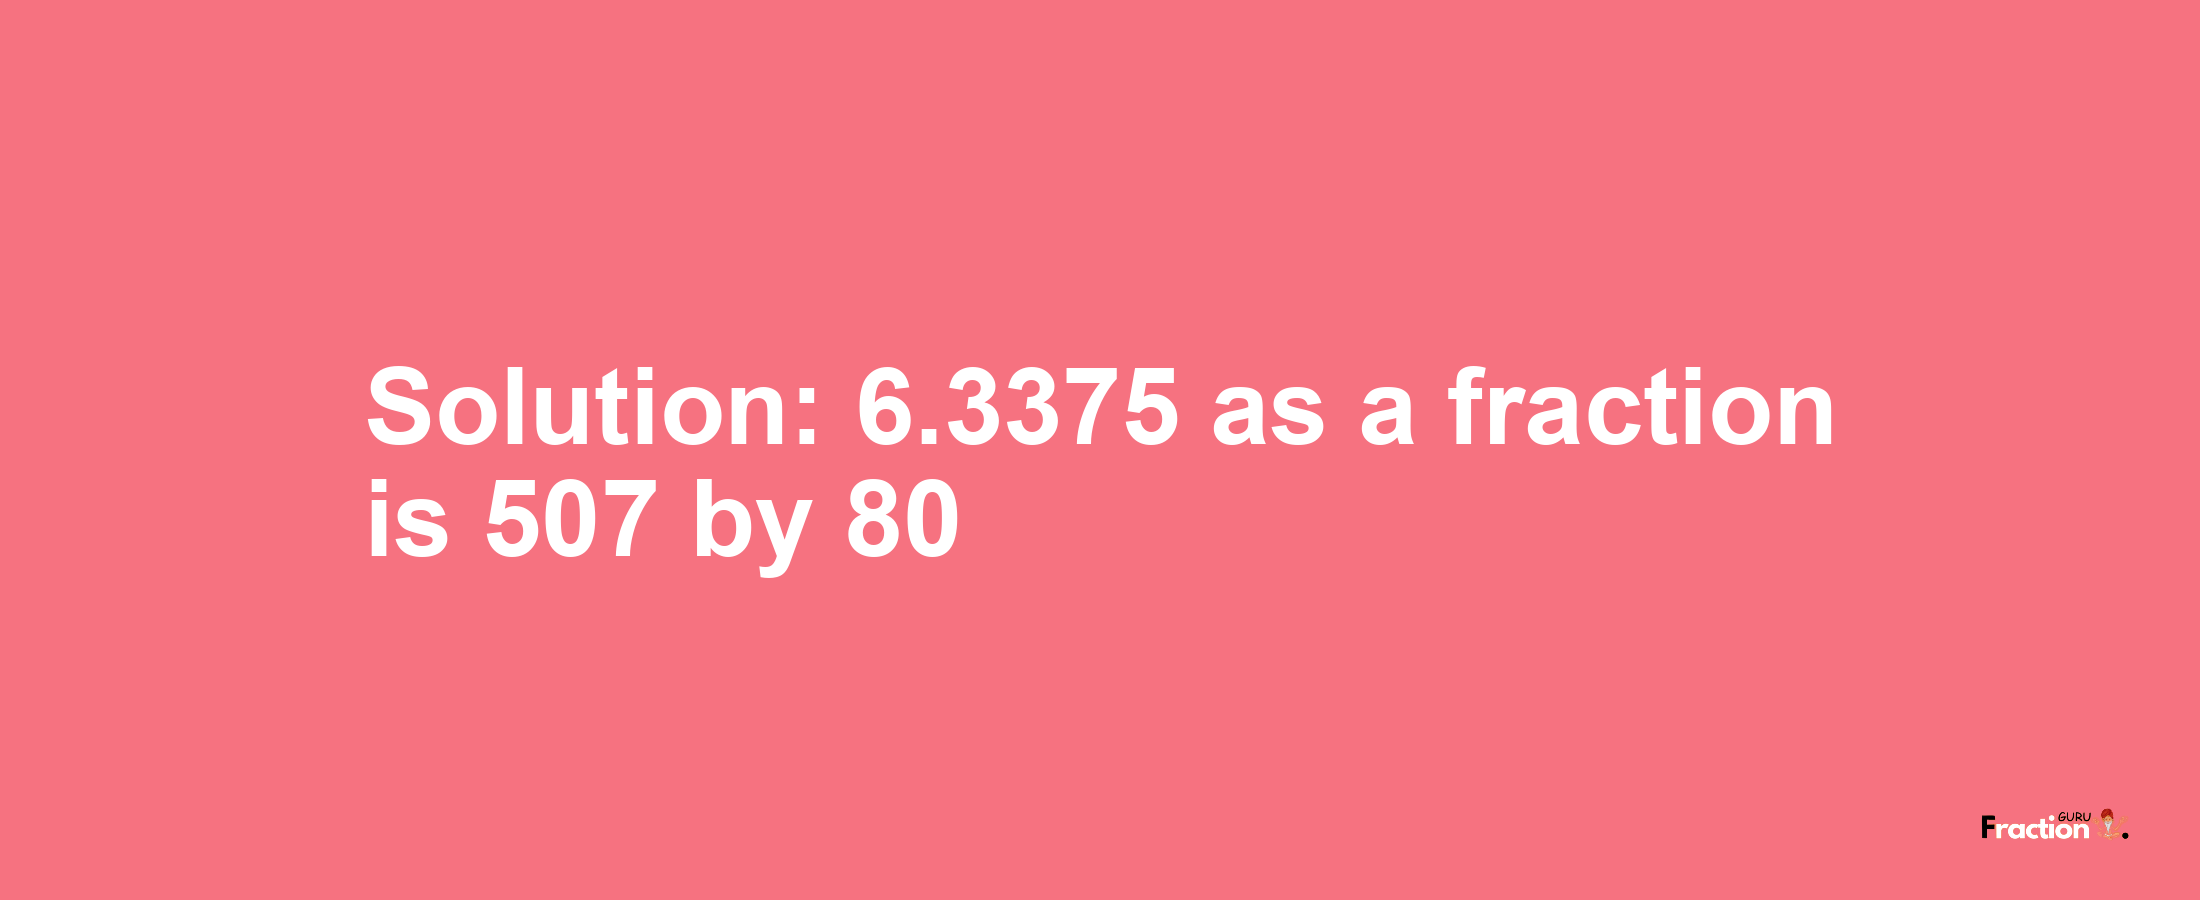 Solution:6.3375 as a fraction is 507/80